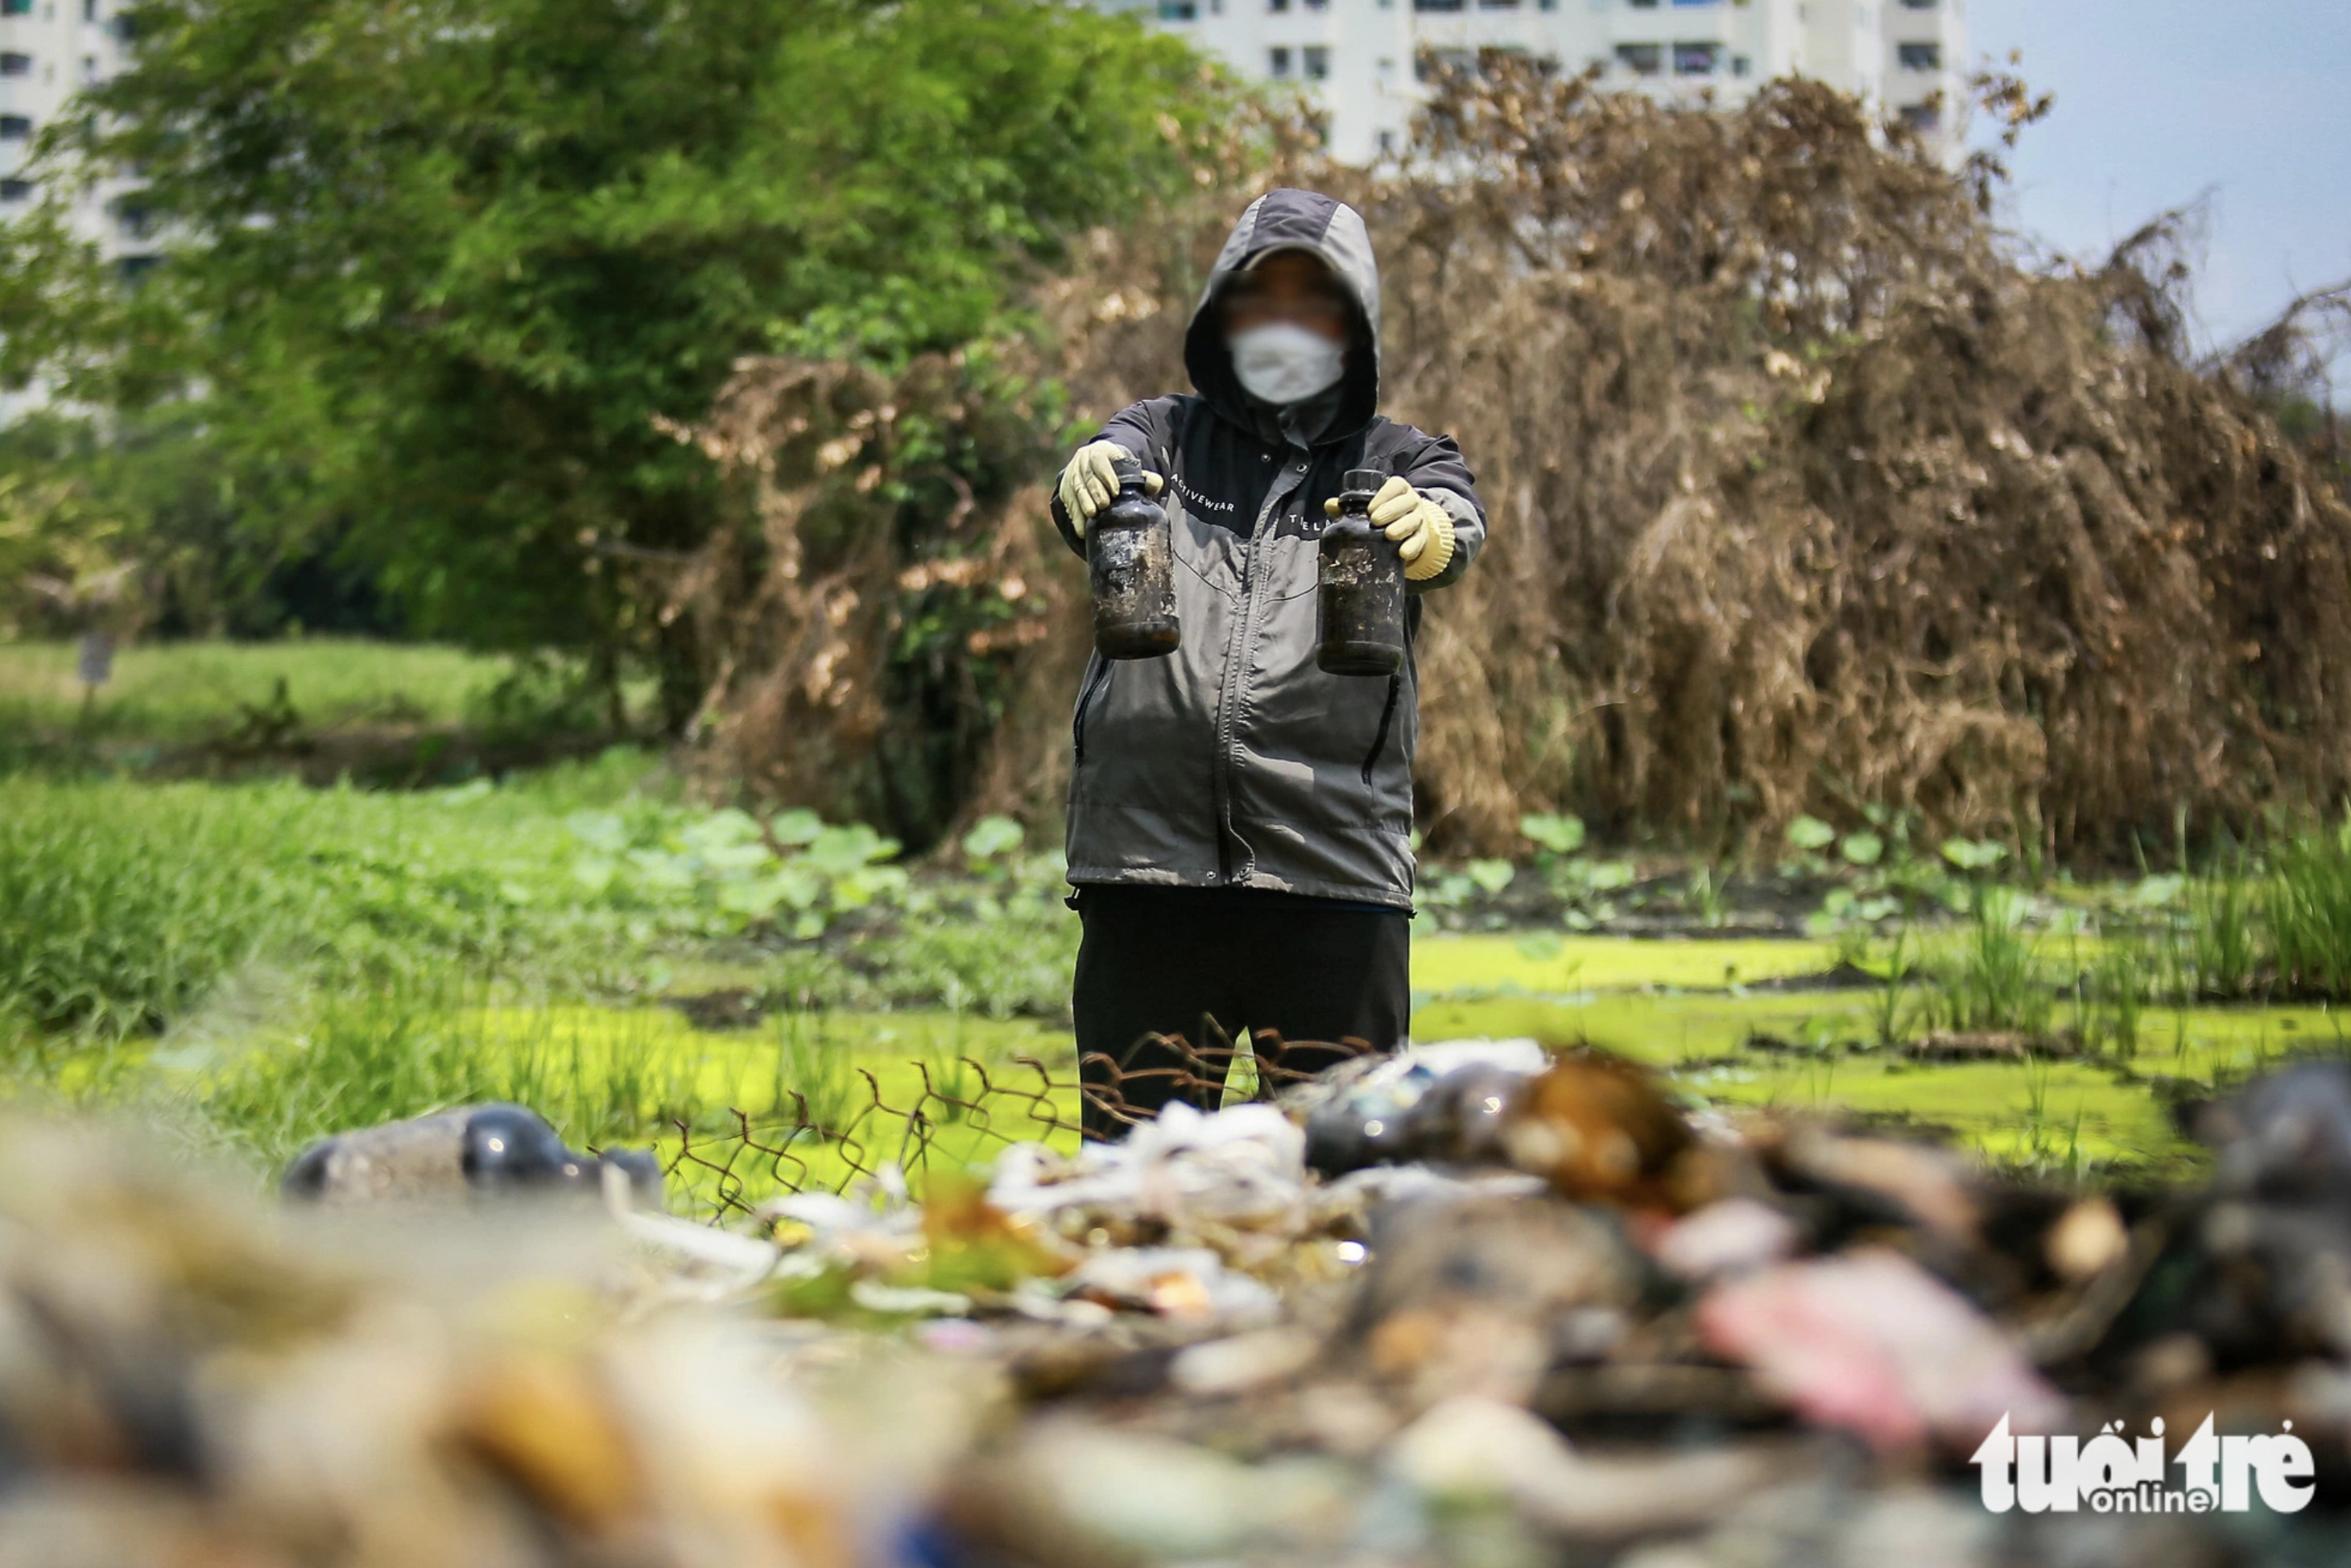 Glass bottles and medical waste litter an area along a swamp in Binh Tan District, Ho Chi Minh City. Photo: Chau Tuan / Tuoi Tre